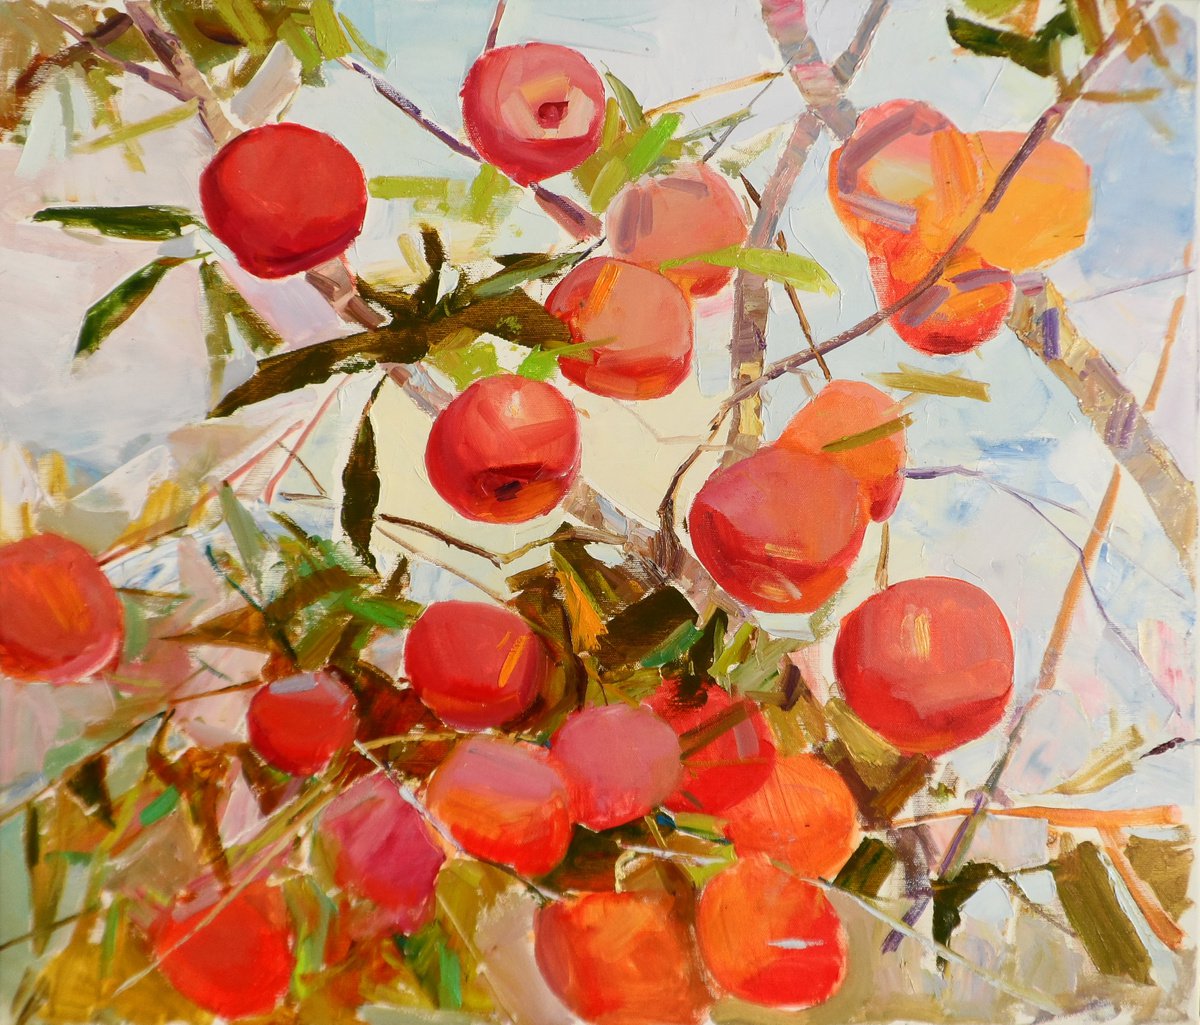 Apples by Yehor Dulin